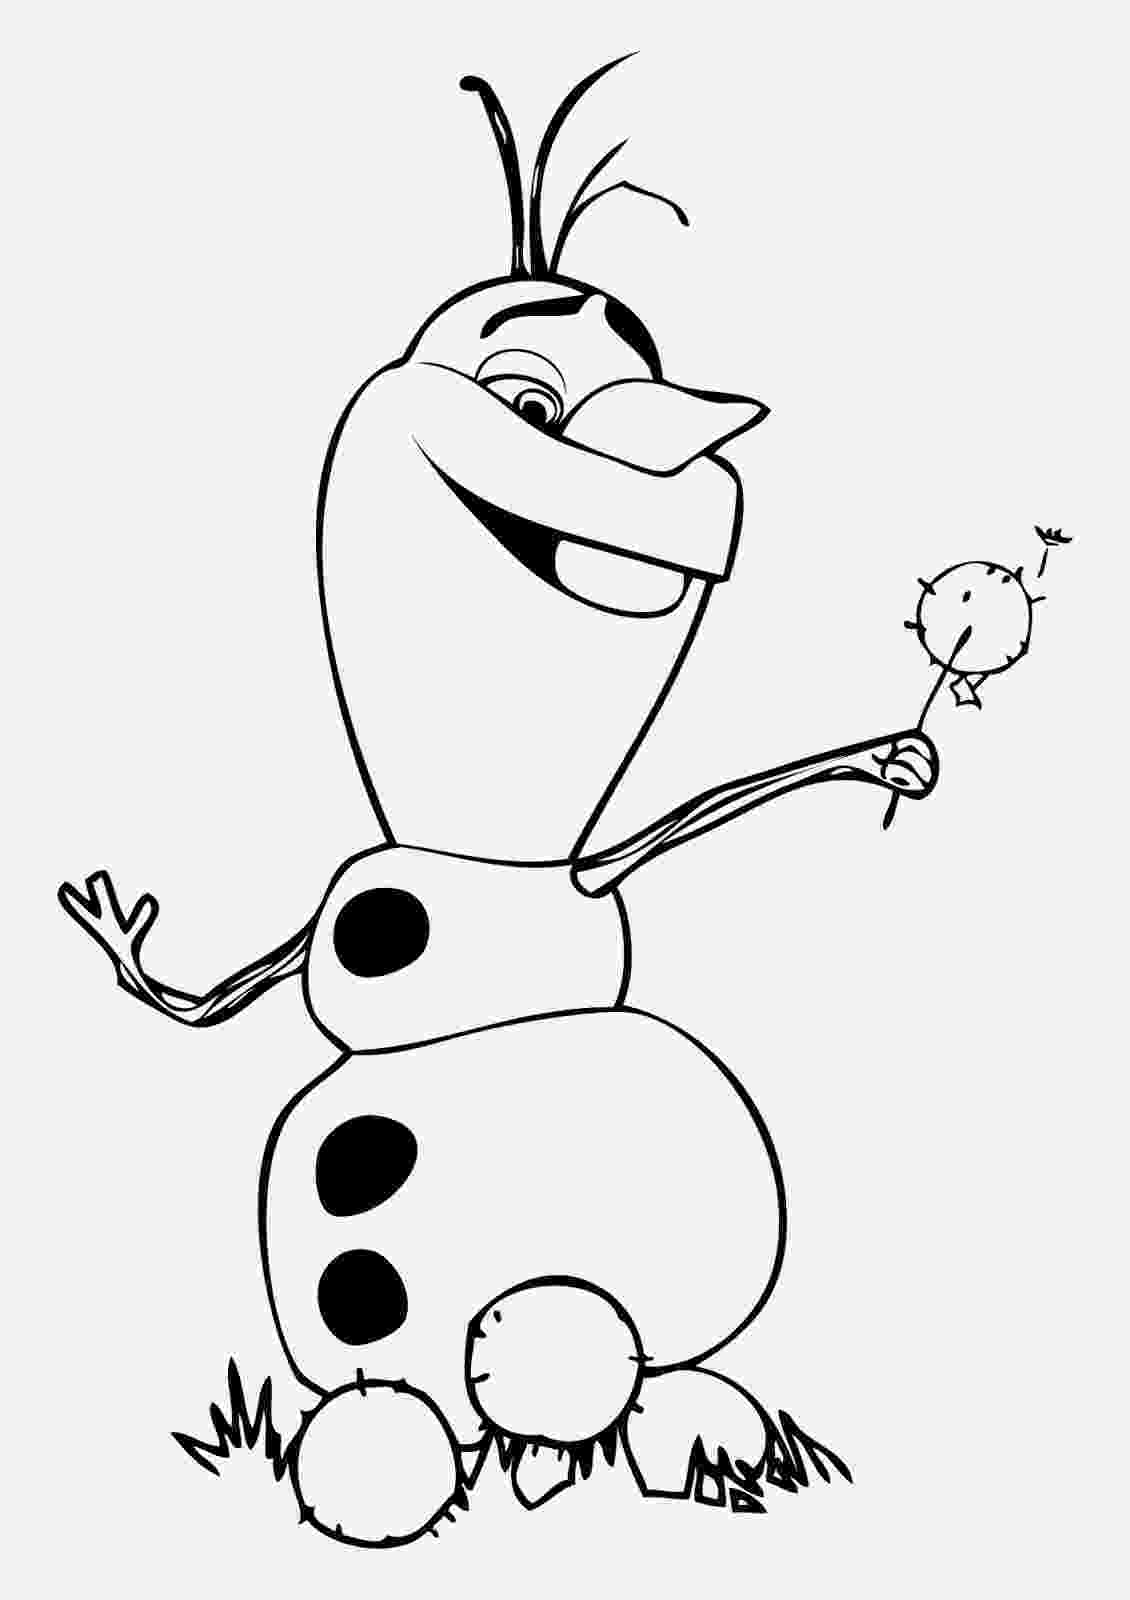 olaf pictures to print frozens olaf coloring pages best coloring pages for kids pictures to print olaf 